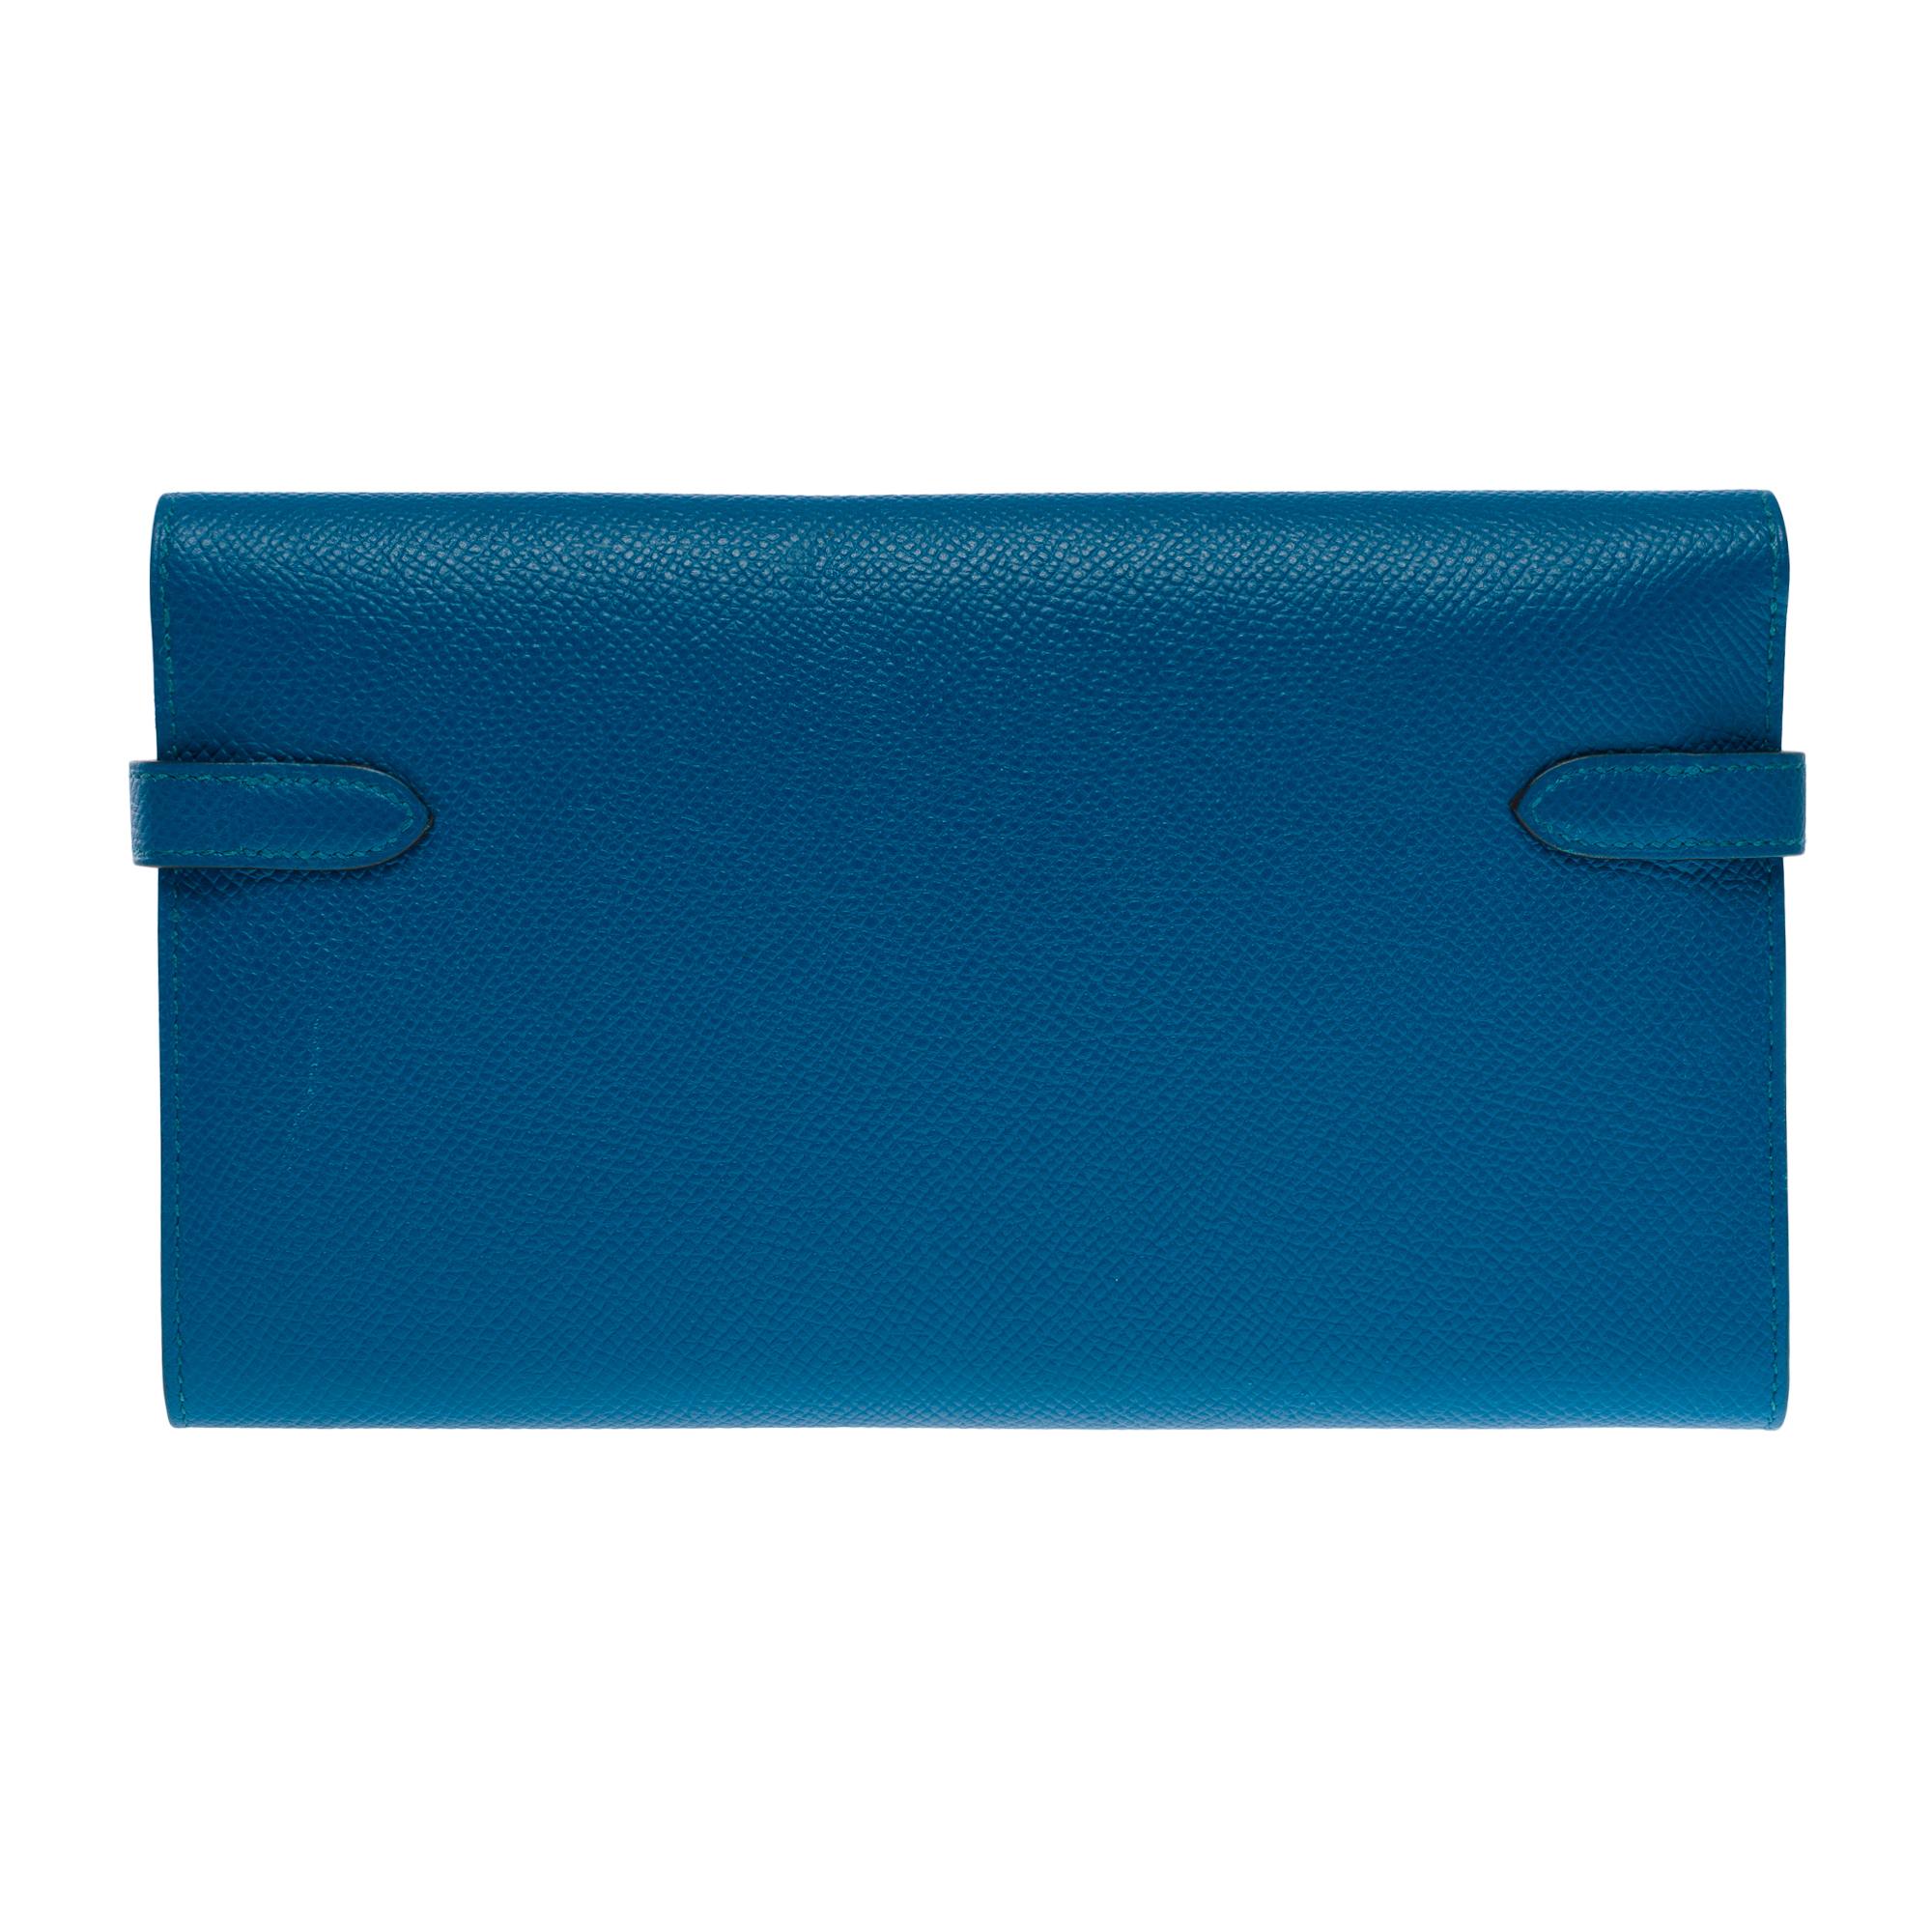 Beautiful​ ​Hermès​ ​Kelly​ ​Wallet​ ​in​ ​bleu canard epsom calf leather​ ​,​ ​palladium​ ​silver​ ​metal​ ​hardware,​ ​for​ ​a​ ​hand​ ​carry

Flap​ ​closure
Blue​ ​leather​ ​inner​ ​lining,​ ​3​ ​compartments​ ​including​ ​a​ ​zip,​ ​two​ ​patch​